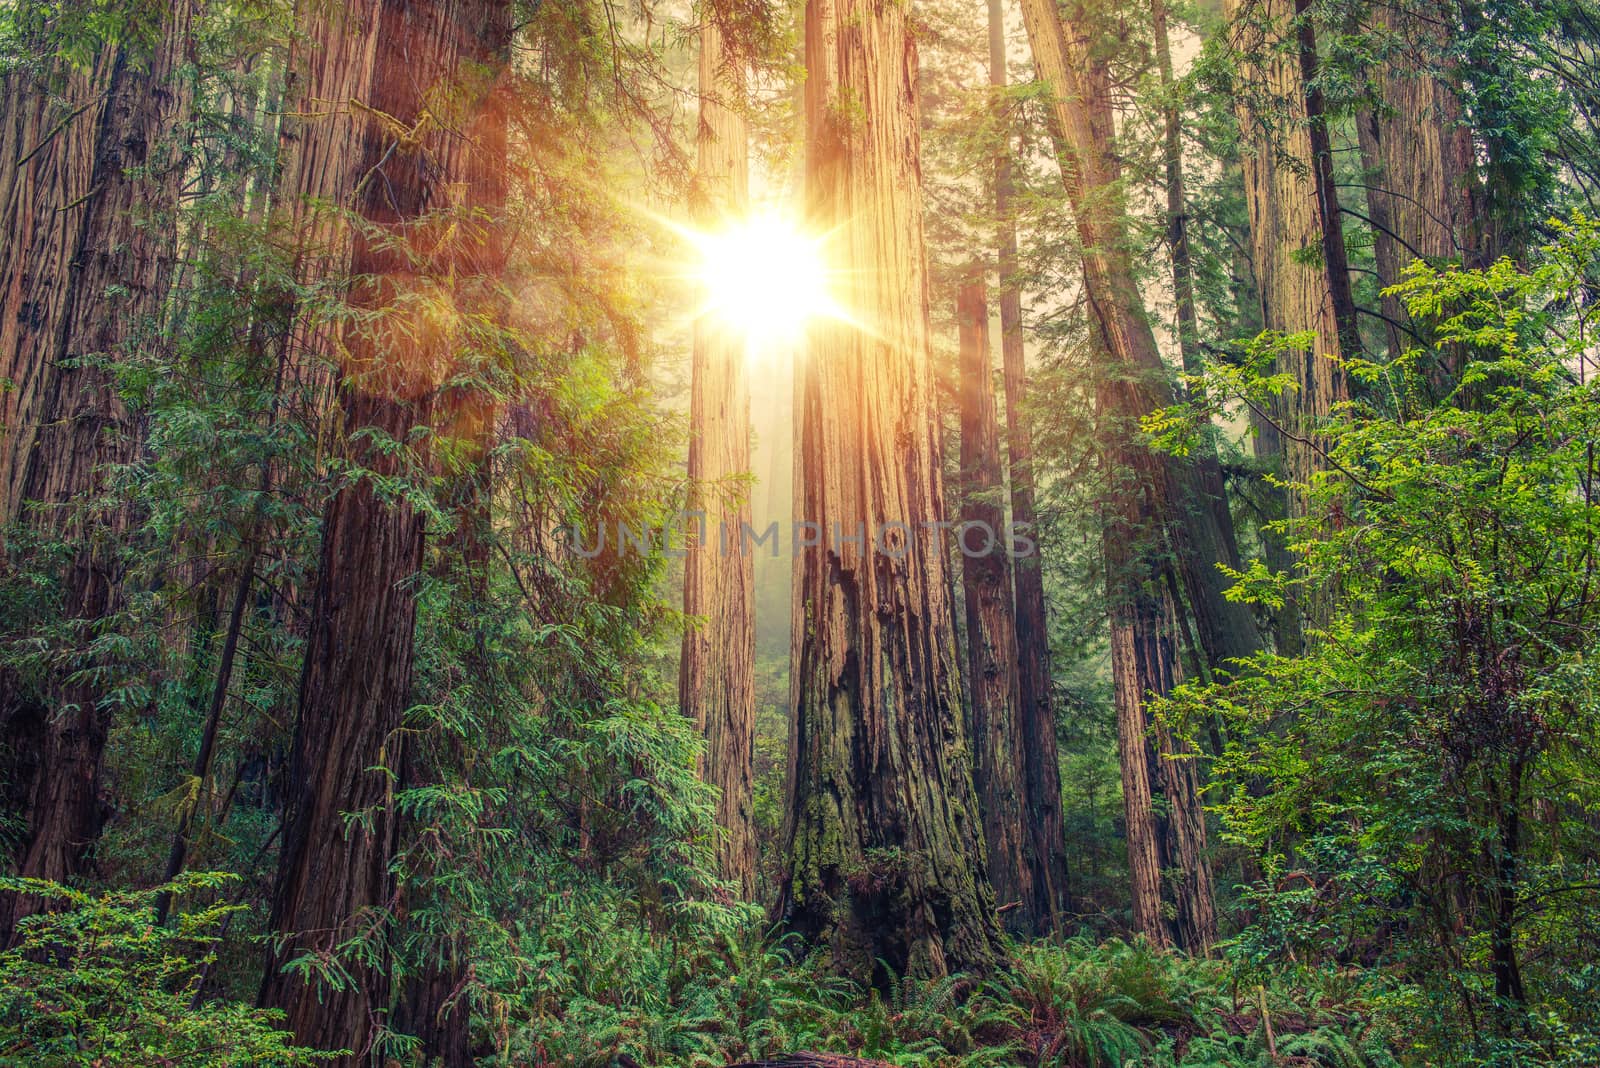 Sunny Redwood Forest in Northern California, United States. Forestry Theme.